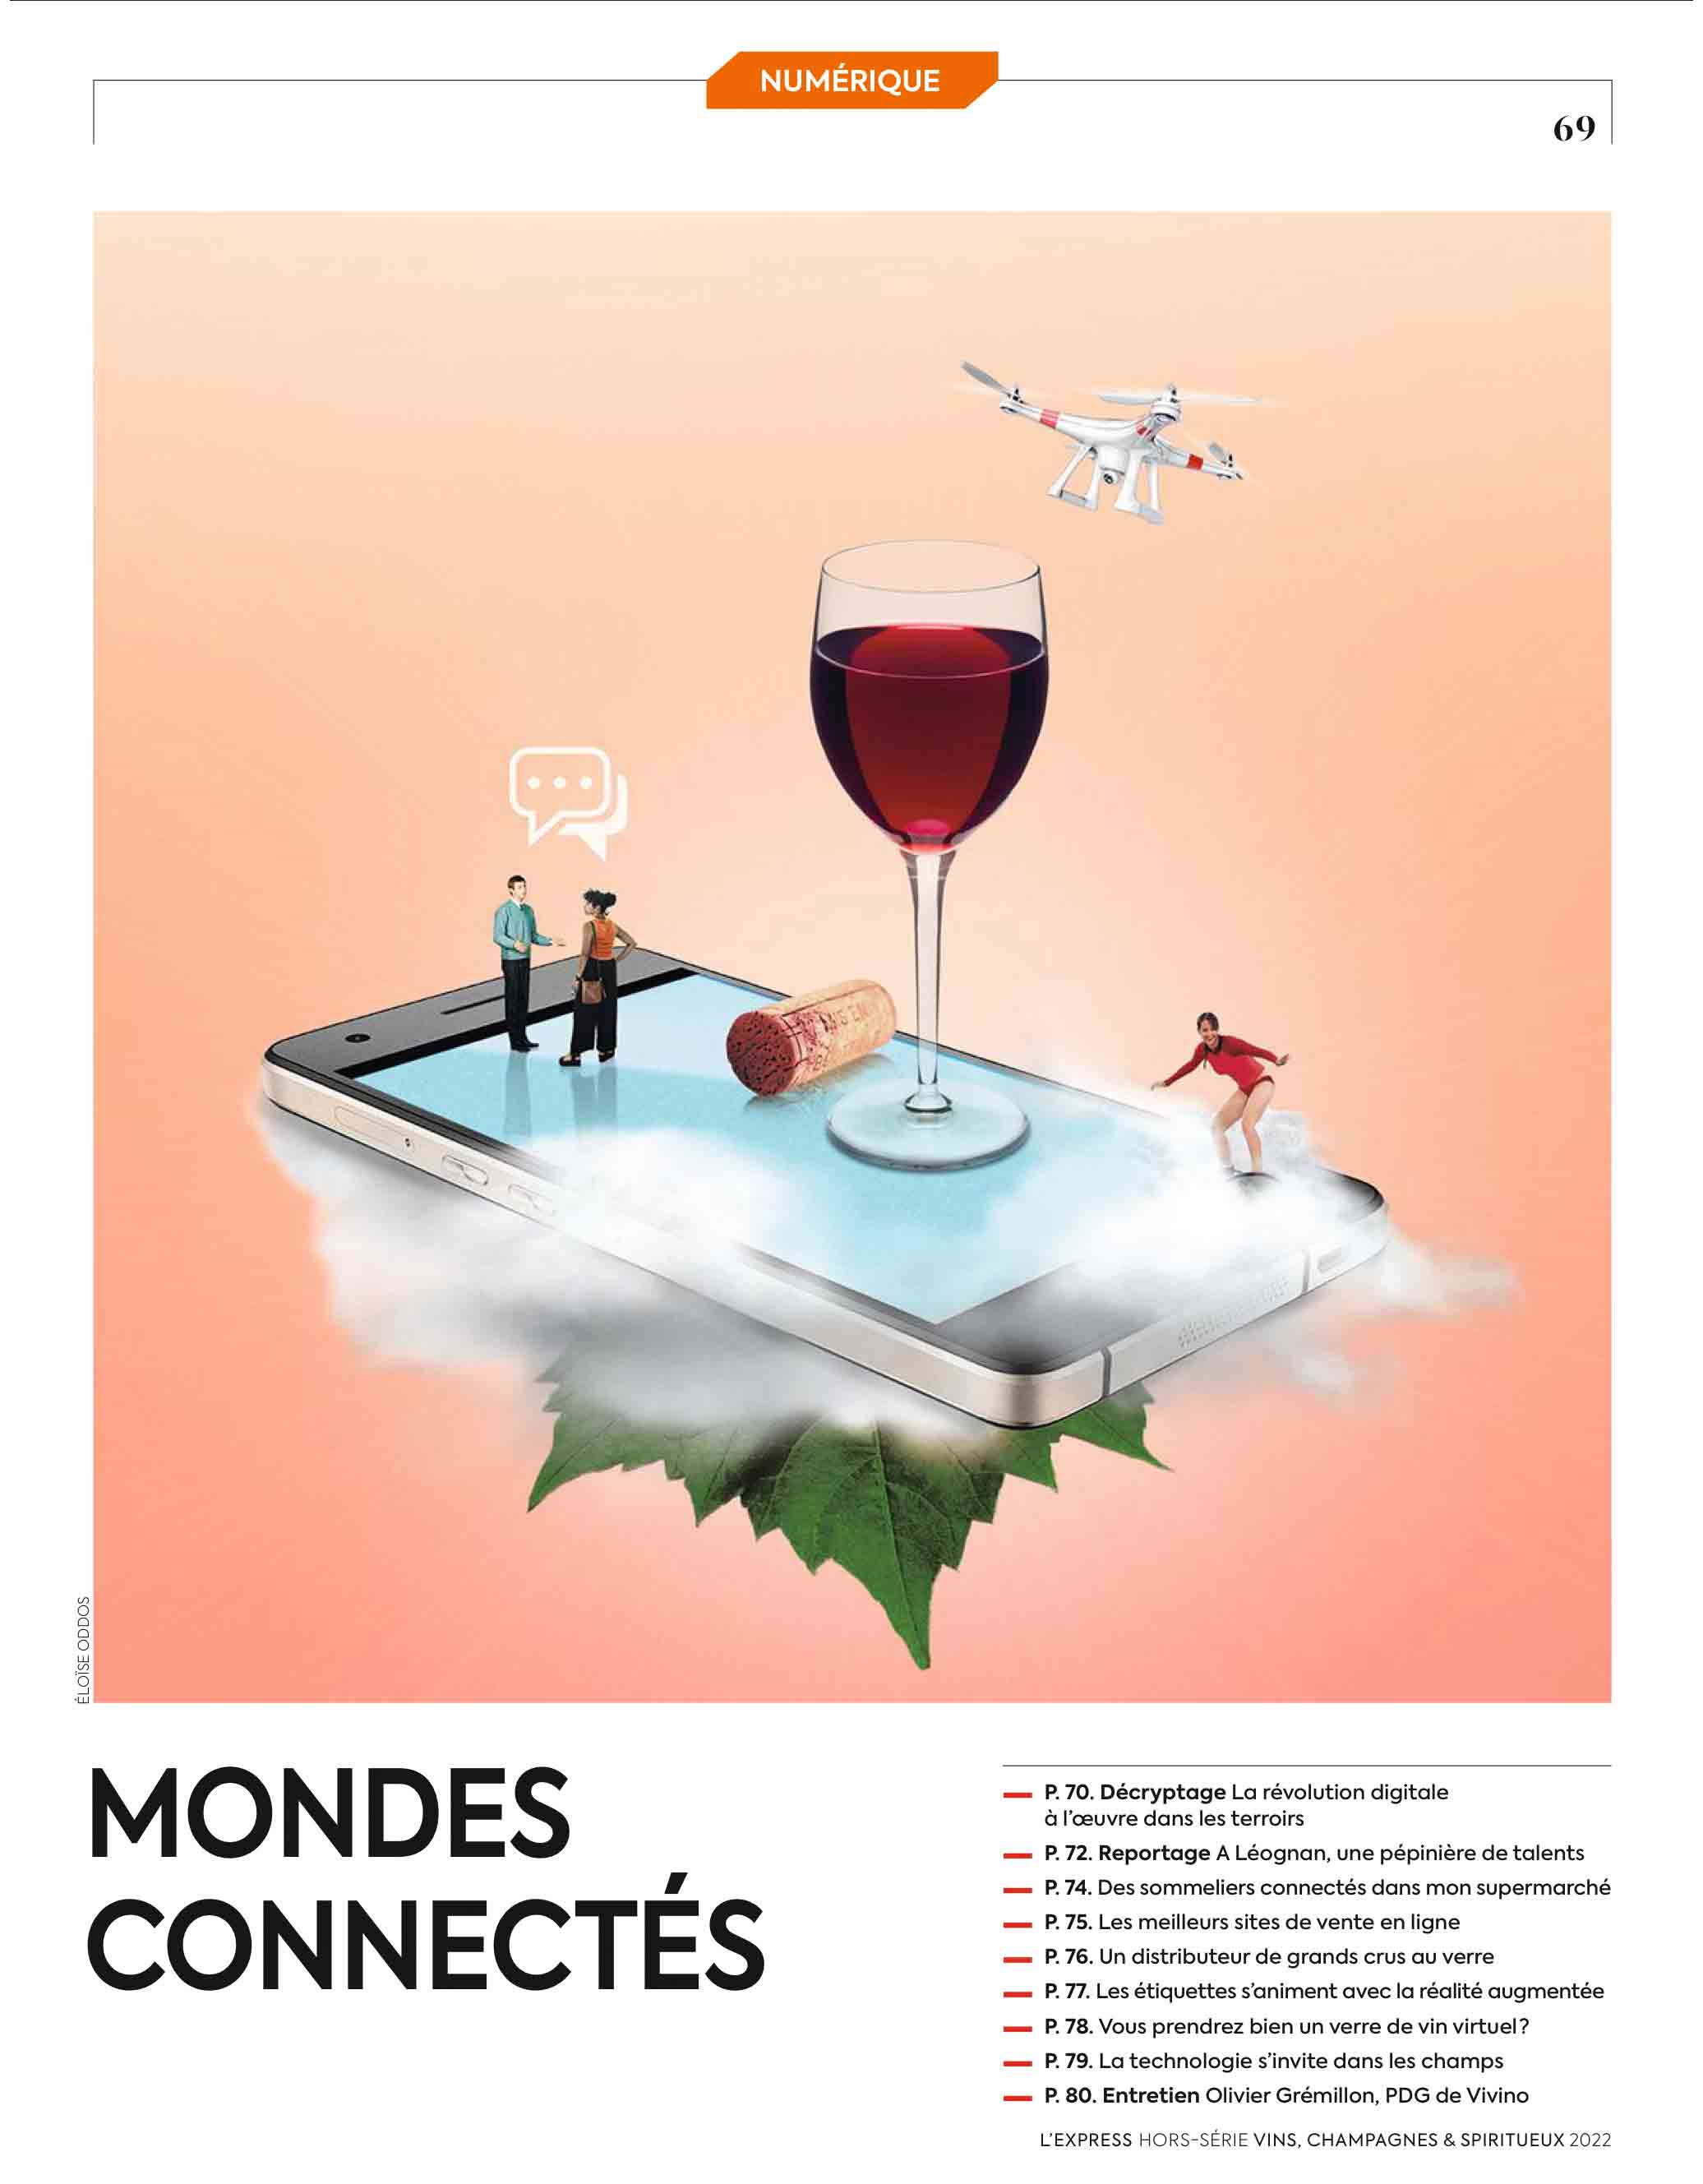 "WORLDS CONNECTED" the Digital Notebook L'Express Hors-Série Vins Champagnes & Spiritueux June 2022